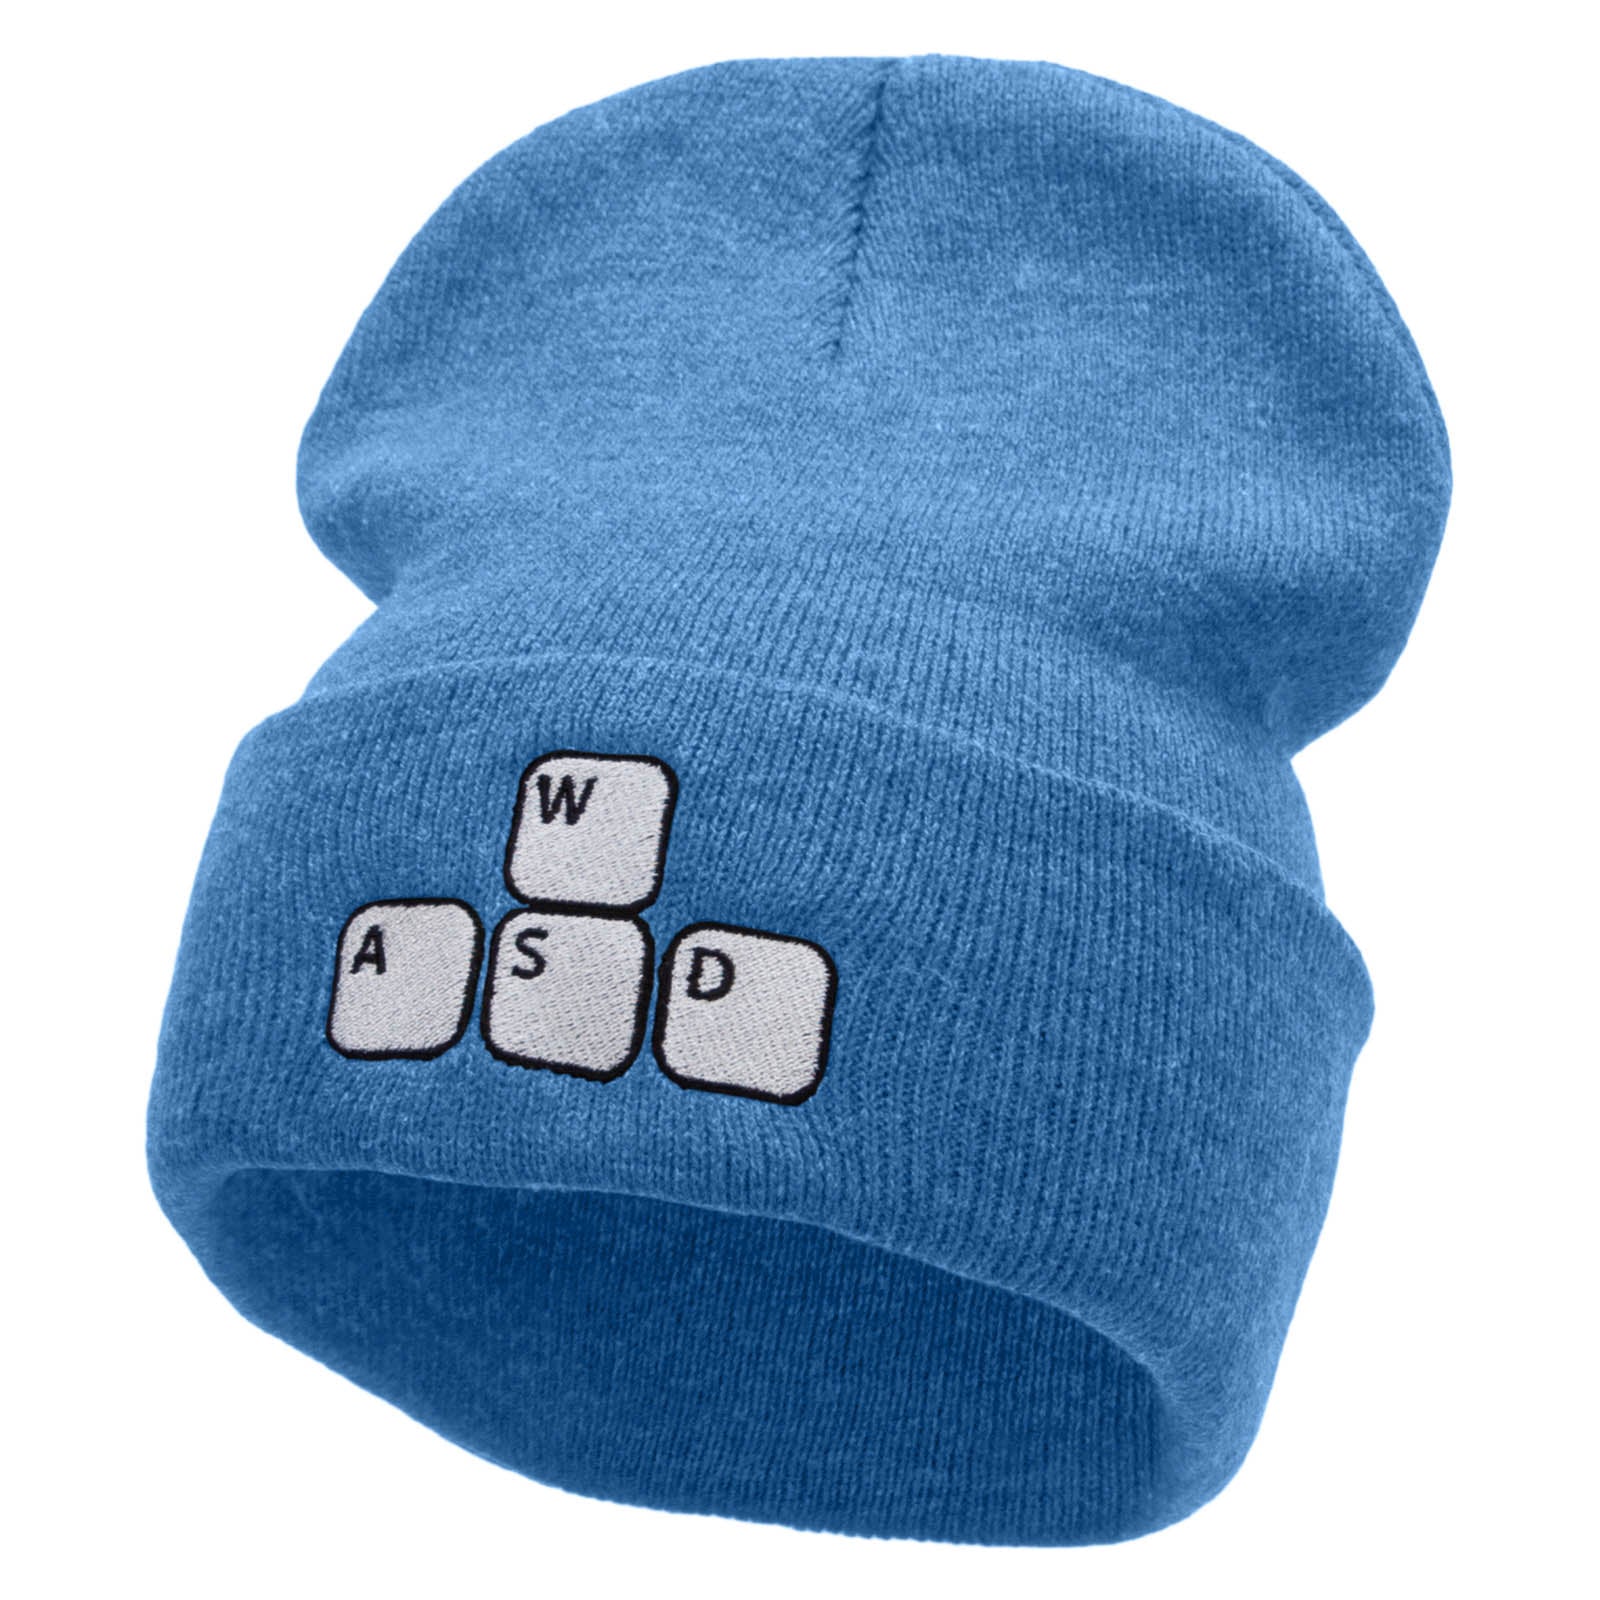 Gamer WASD Embroidered 12 Inch Long Knitted Beanie - Sky Blue OSFM